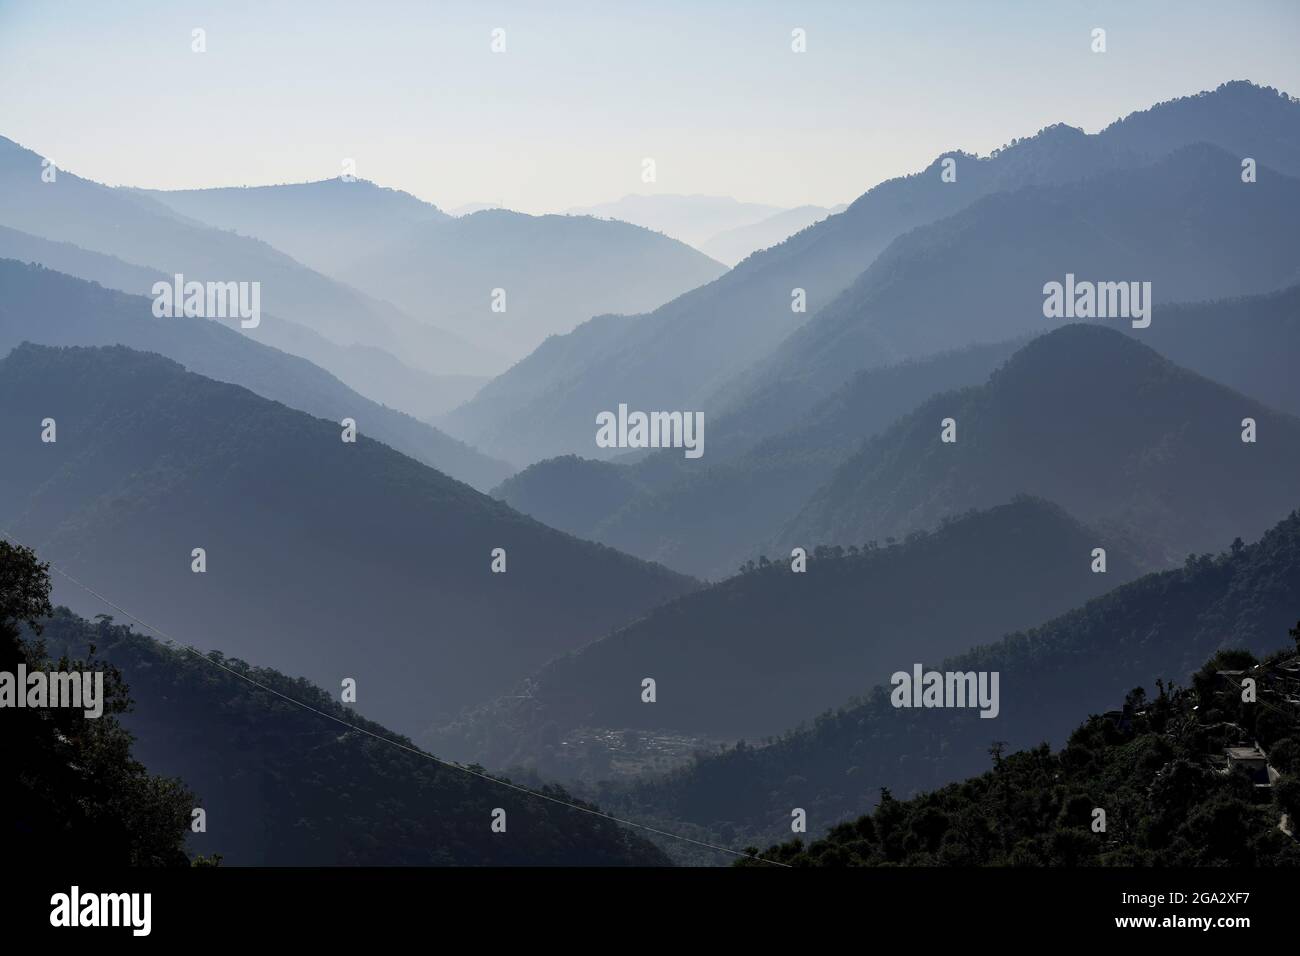 Silhouetted view of the foothills of the Himalayas between the Rishikesh and Devprayag in the Ganges Valley; Uttarakhand, India Stock Photo